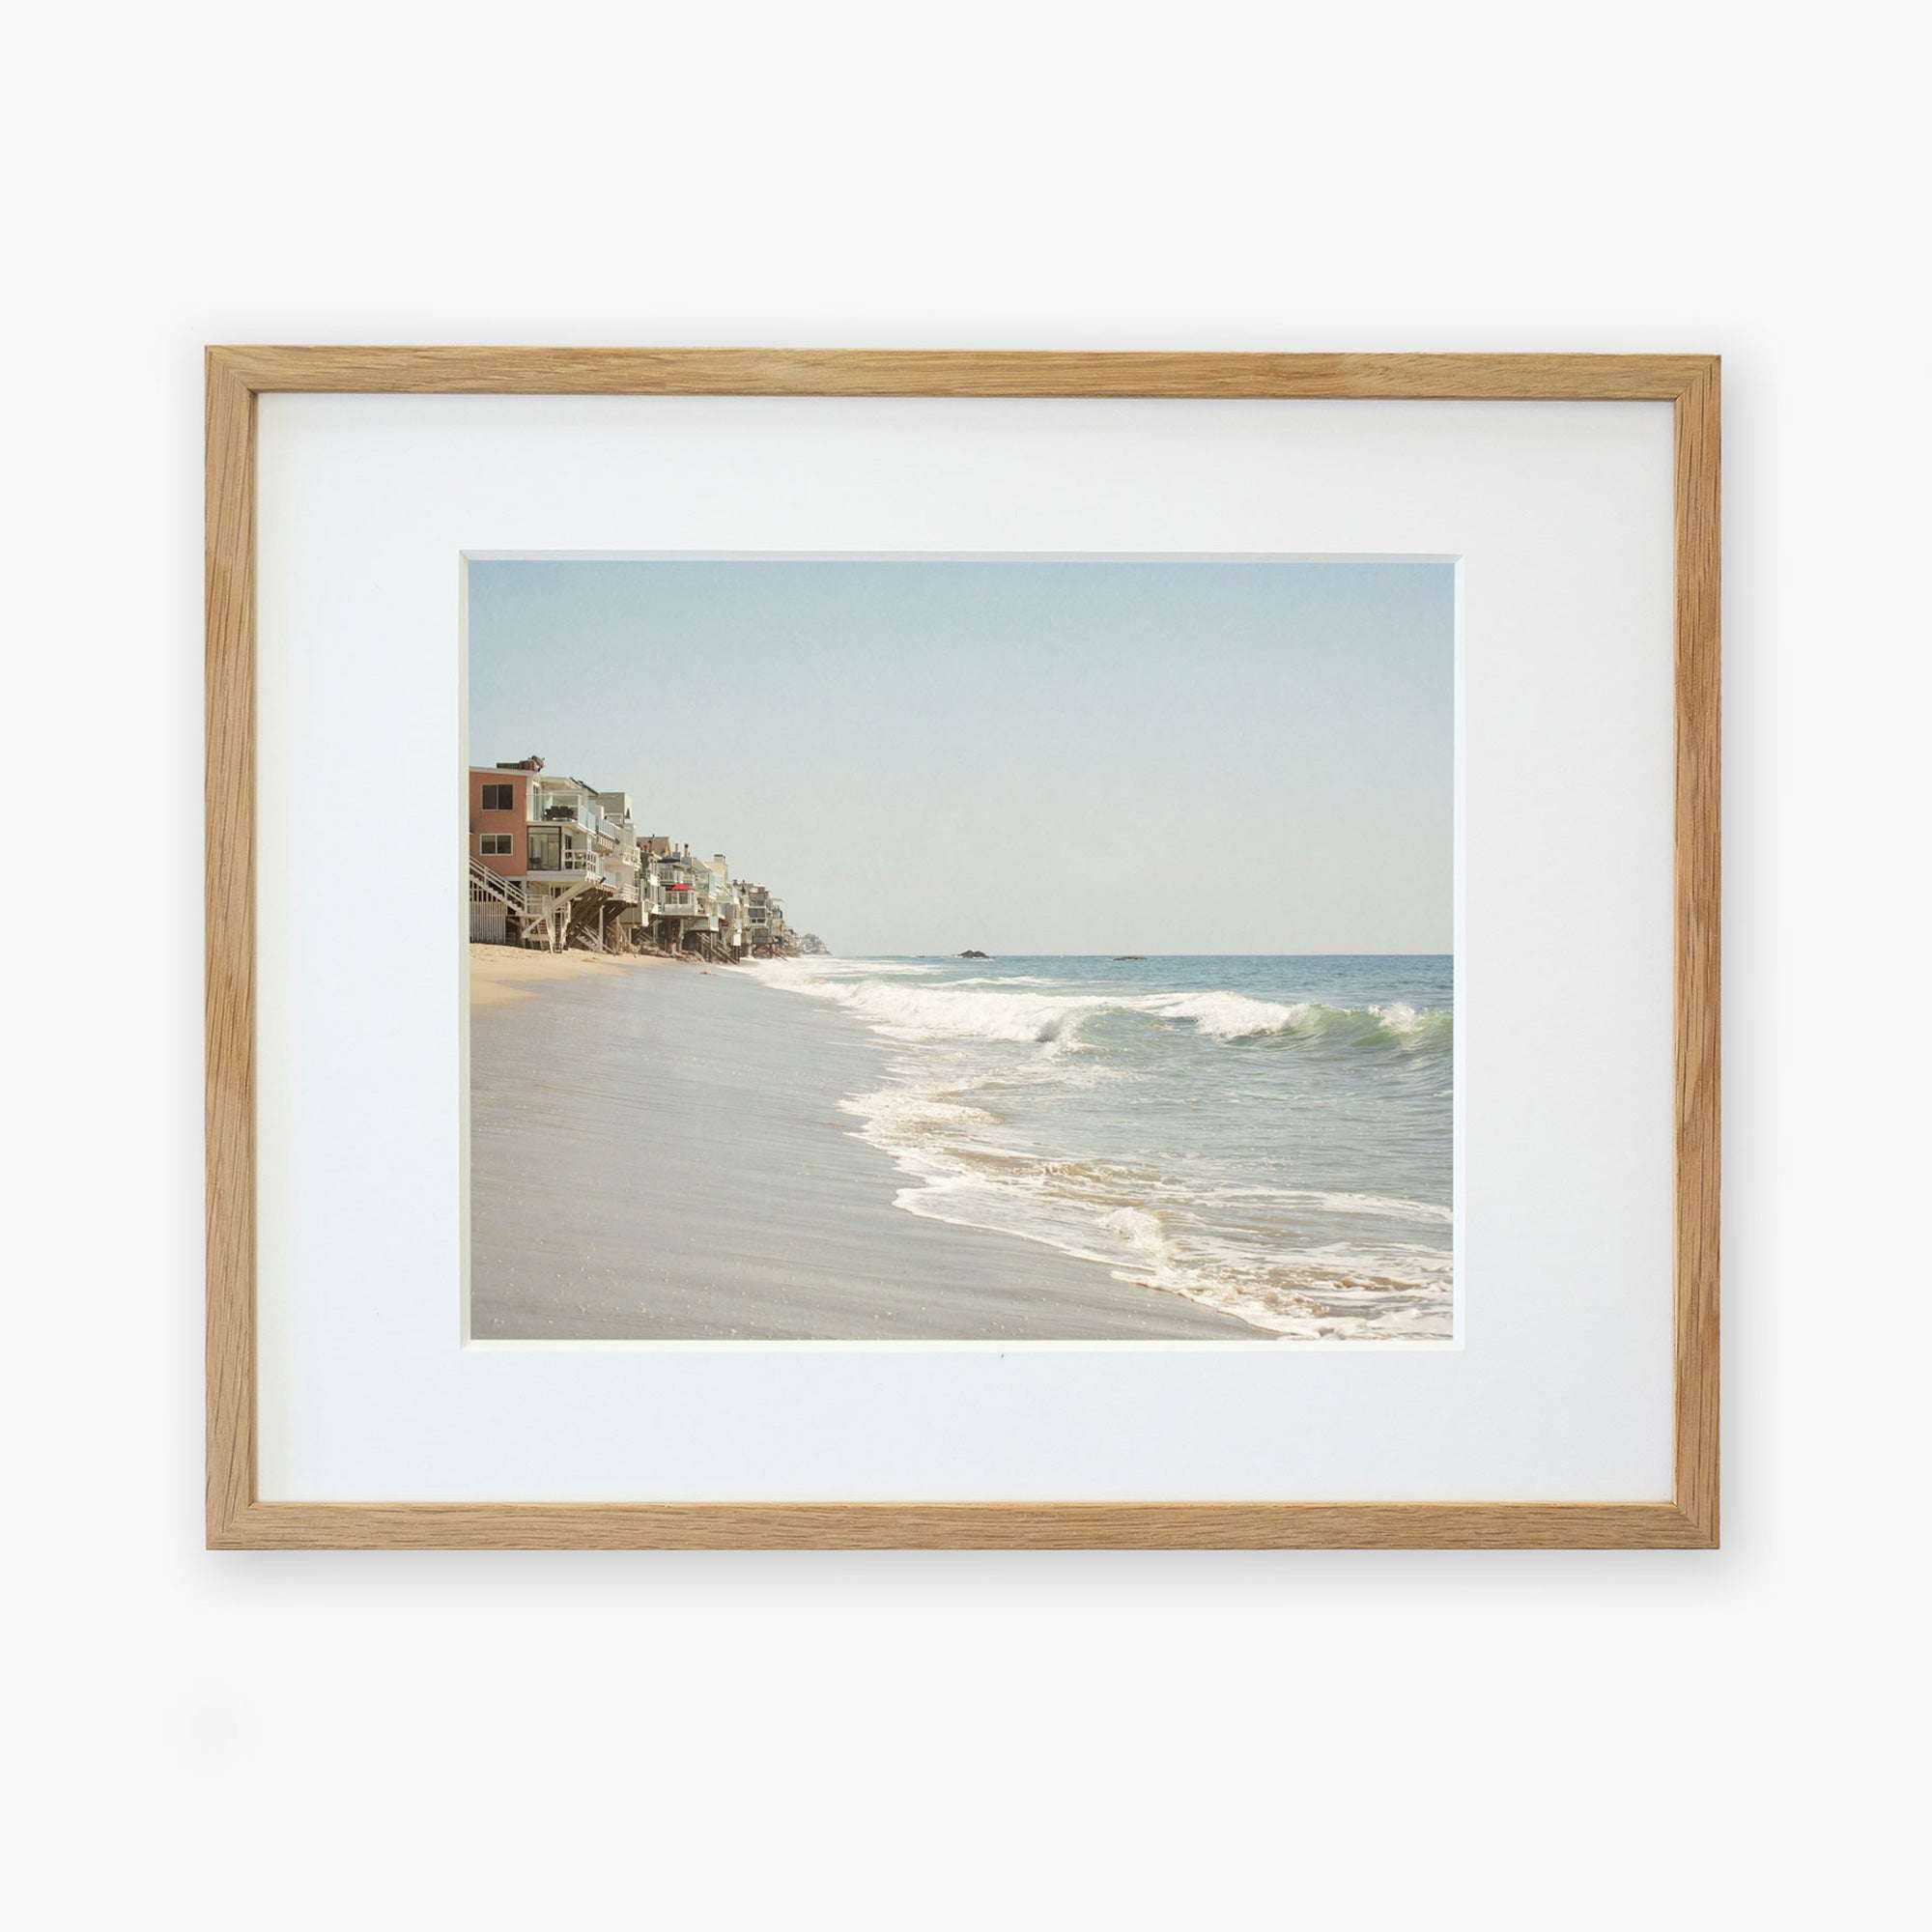 A framed photograph of a Malibu Beach House Print, &#39;Ocean View&#39; by Offley Green showing gentle waves lapping onto a sandy shore with a line of houses extending along the beachfront.